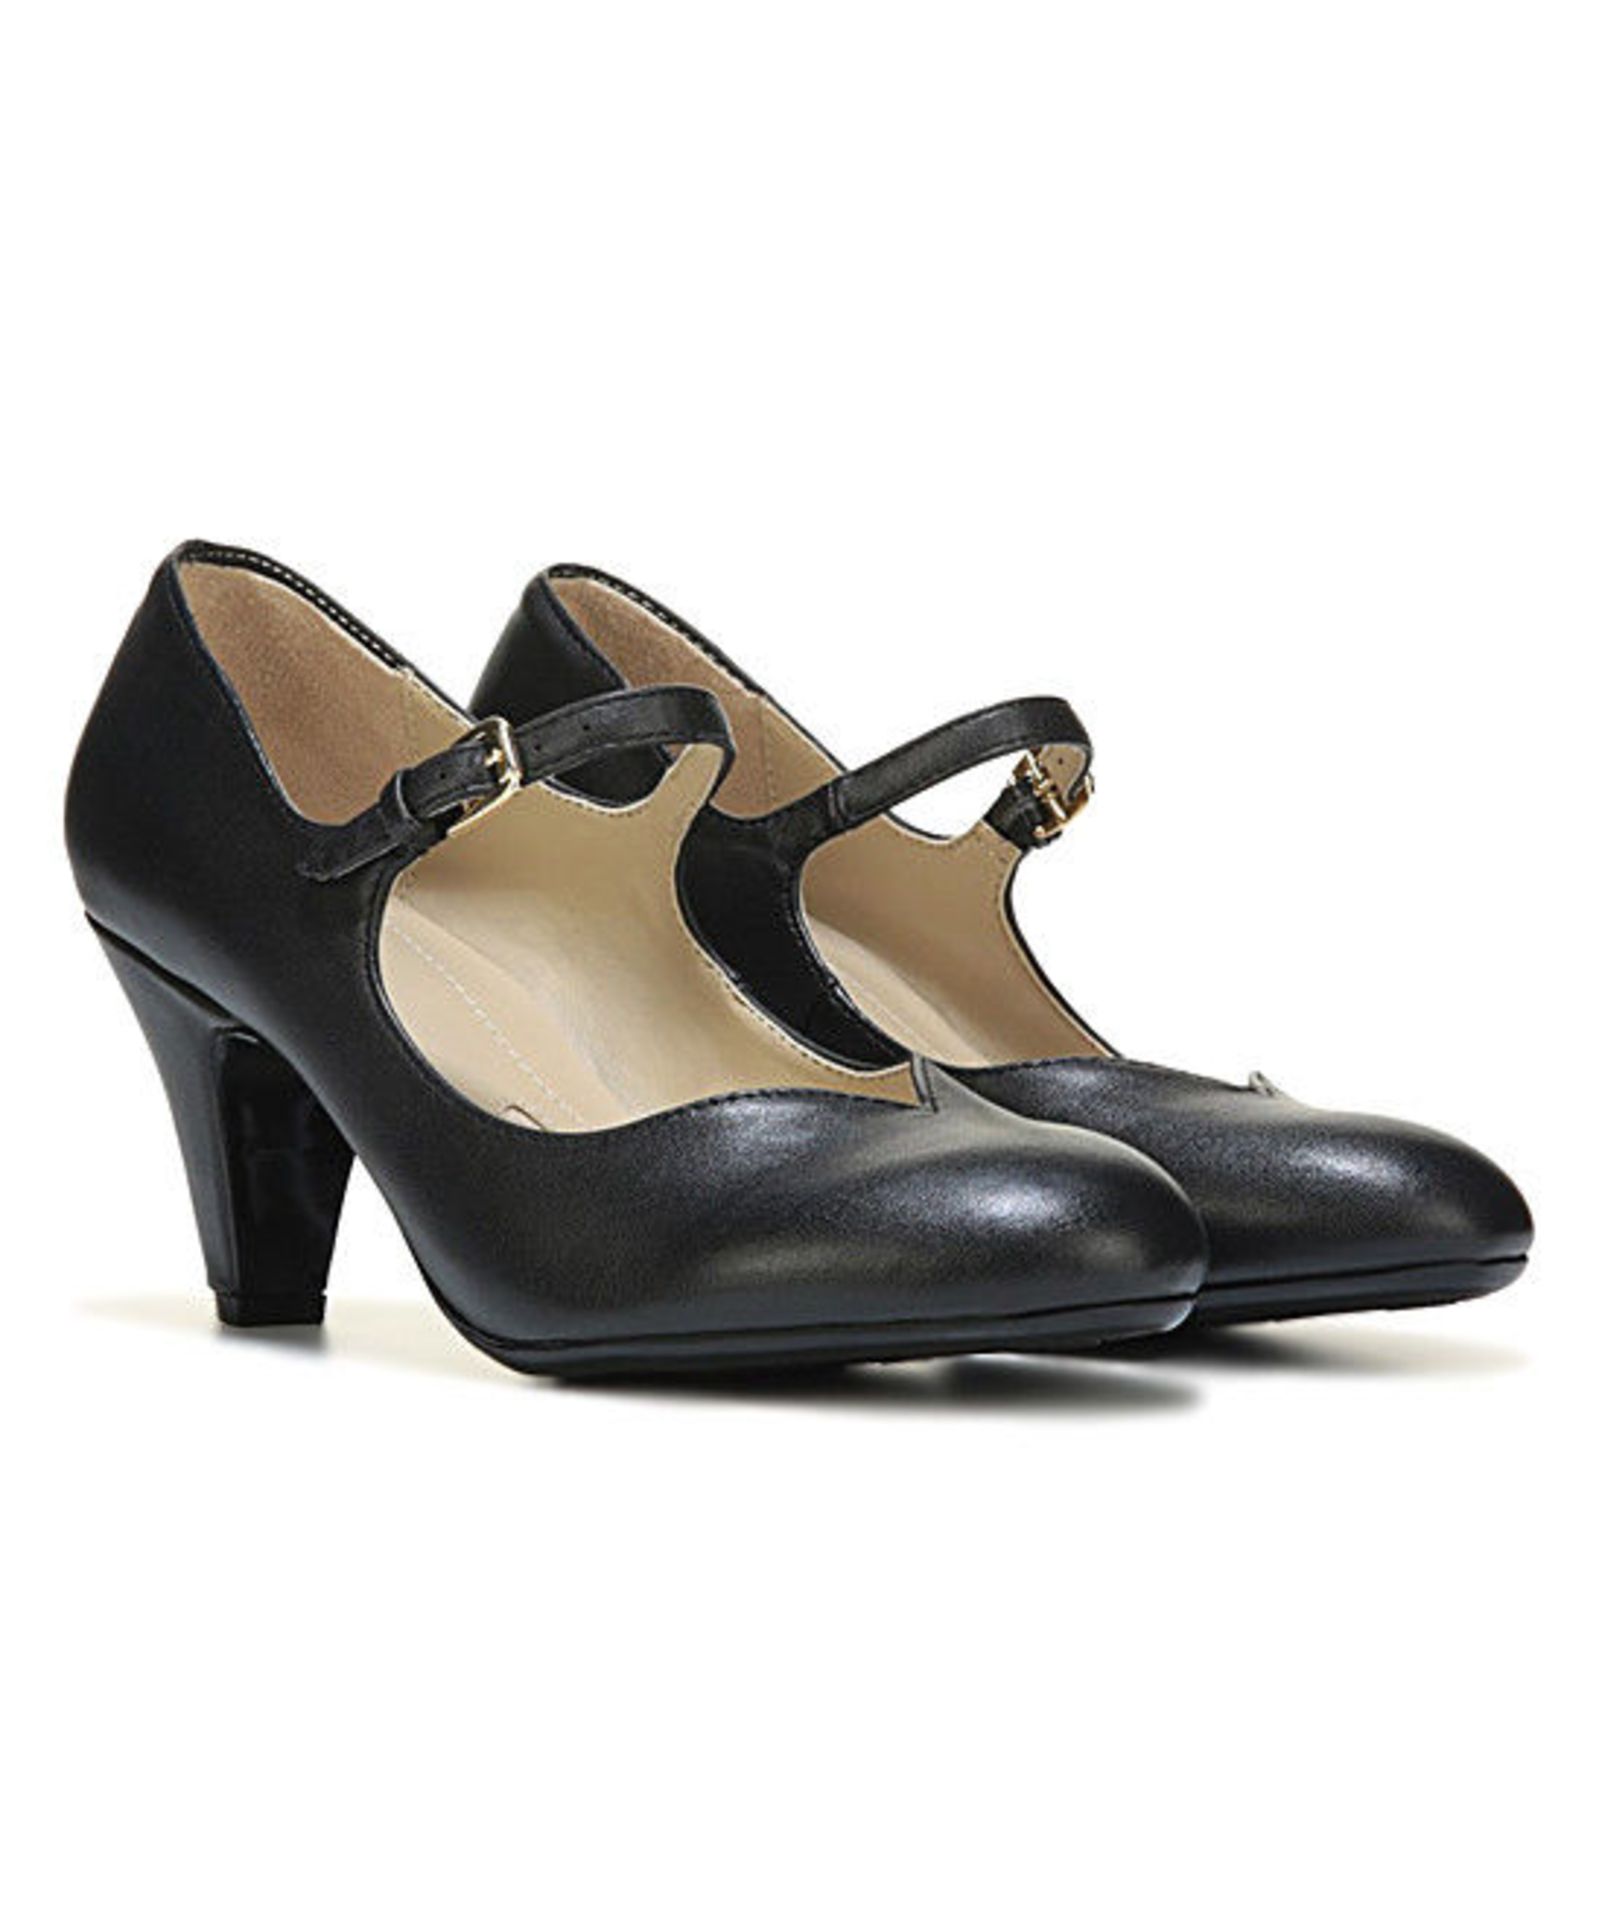 Naturalizer, Black Believe Pump, Size Uk 3.5-4 Eur 35.5 (New With Box) [Ref: 40957397 B]